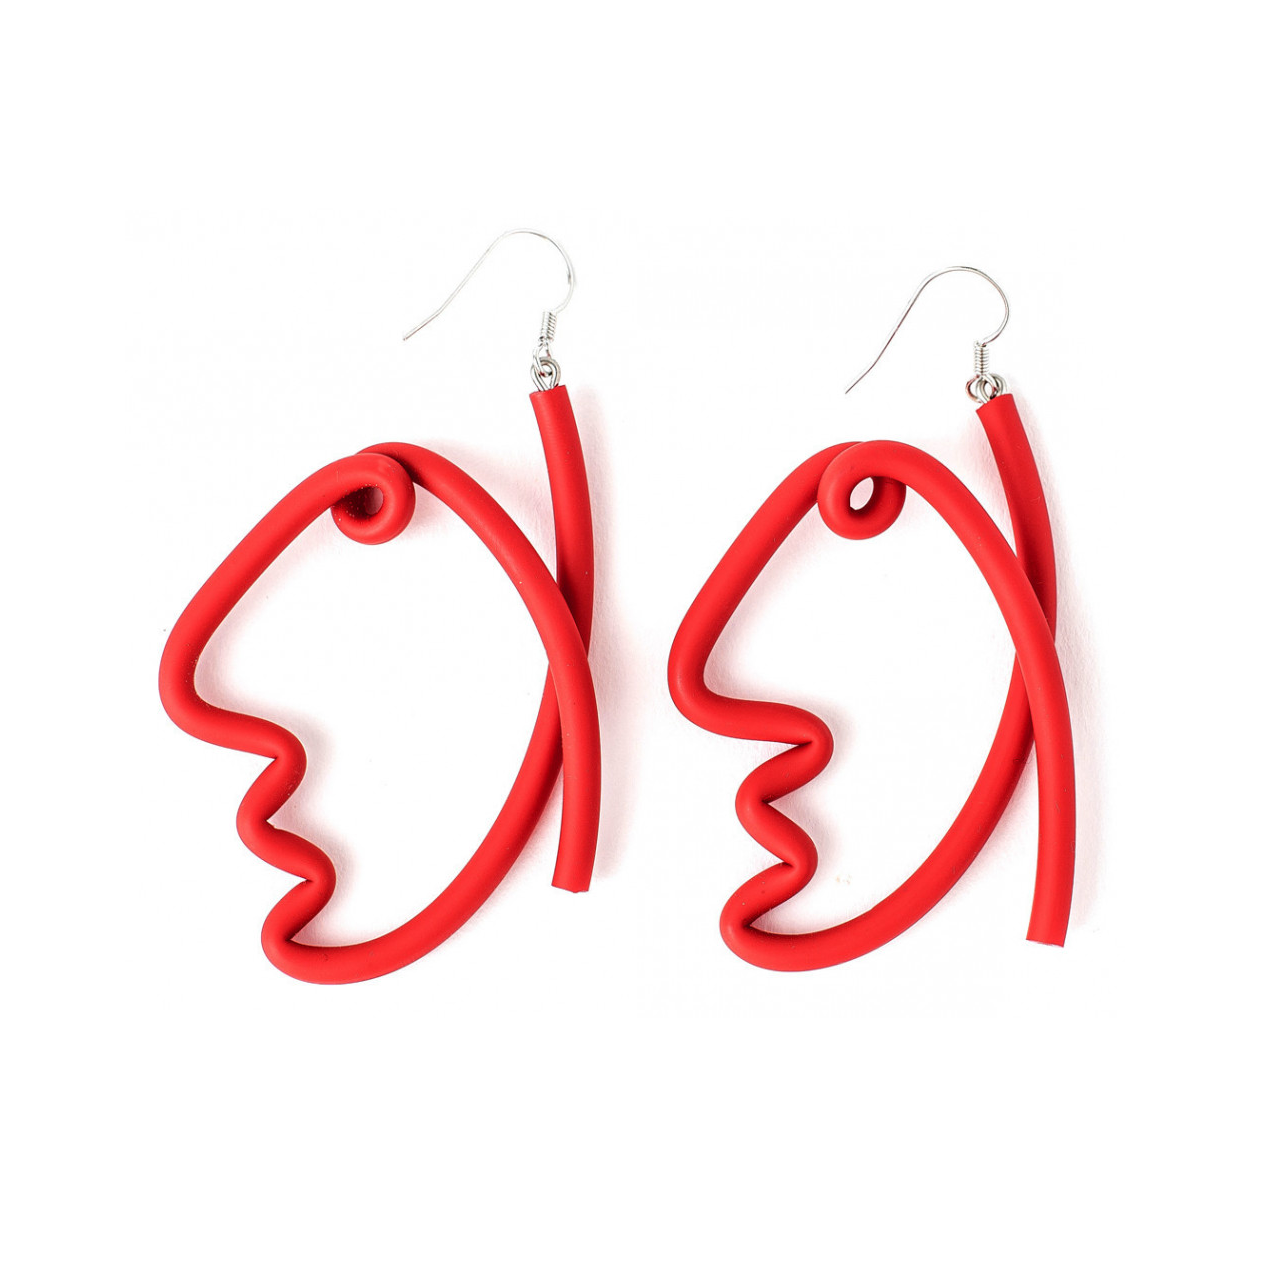 https://cdn11.bigcommerce.com/s-e9xh4/images/stencil/1280x1280/products/14205/29082/Red-Face-Rubber-Earringsa__72062.1616706311.png?c=2?imbypass=on